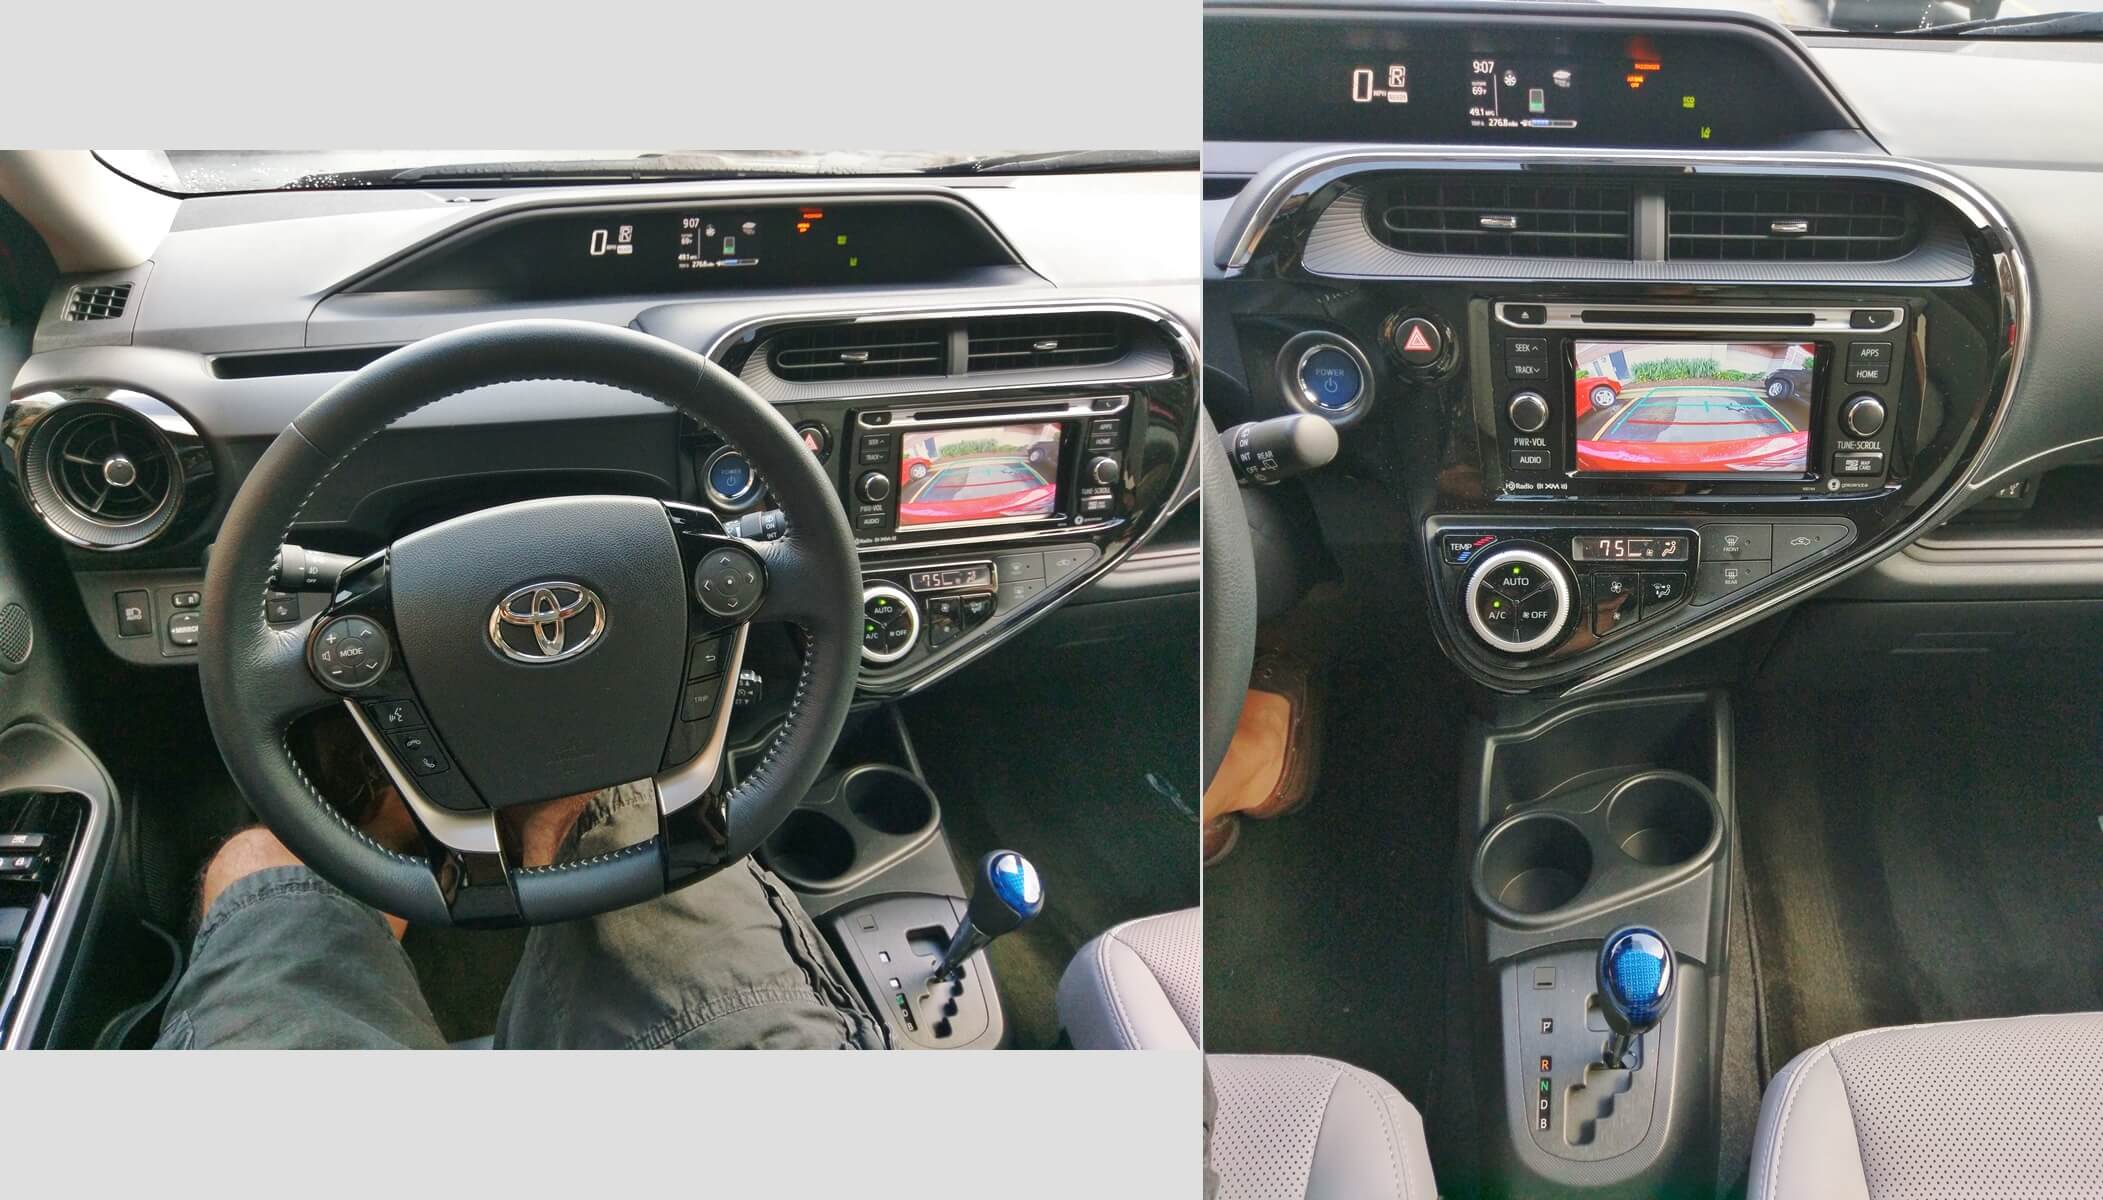 2018 Toyota Prius C Four: standard rear camera w/ park assist grid on 6.1"-inch LCD display